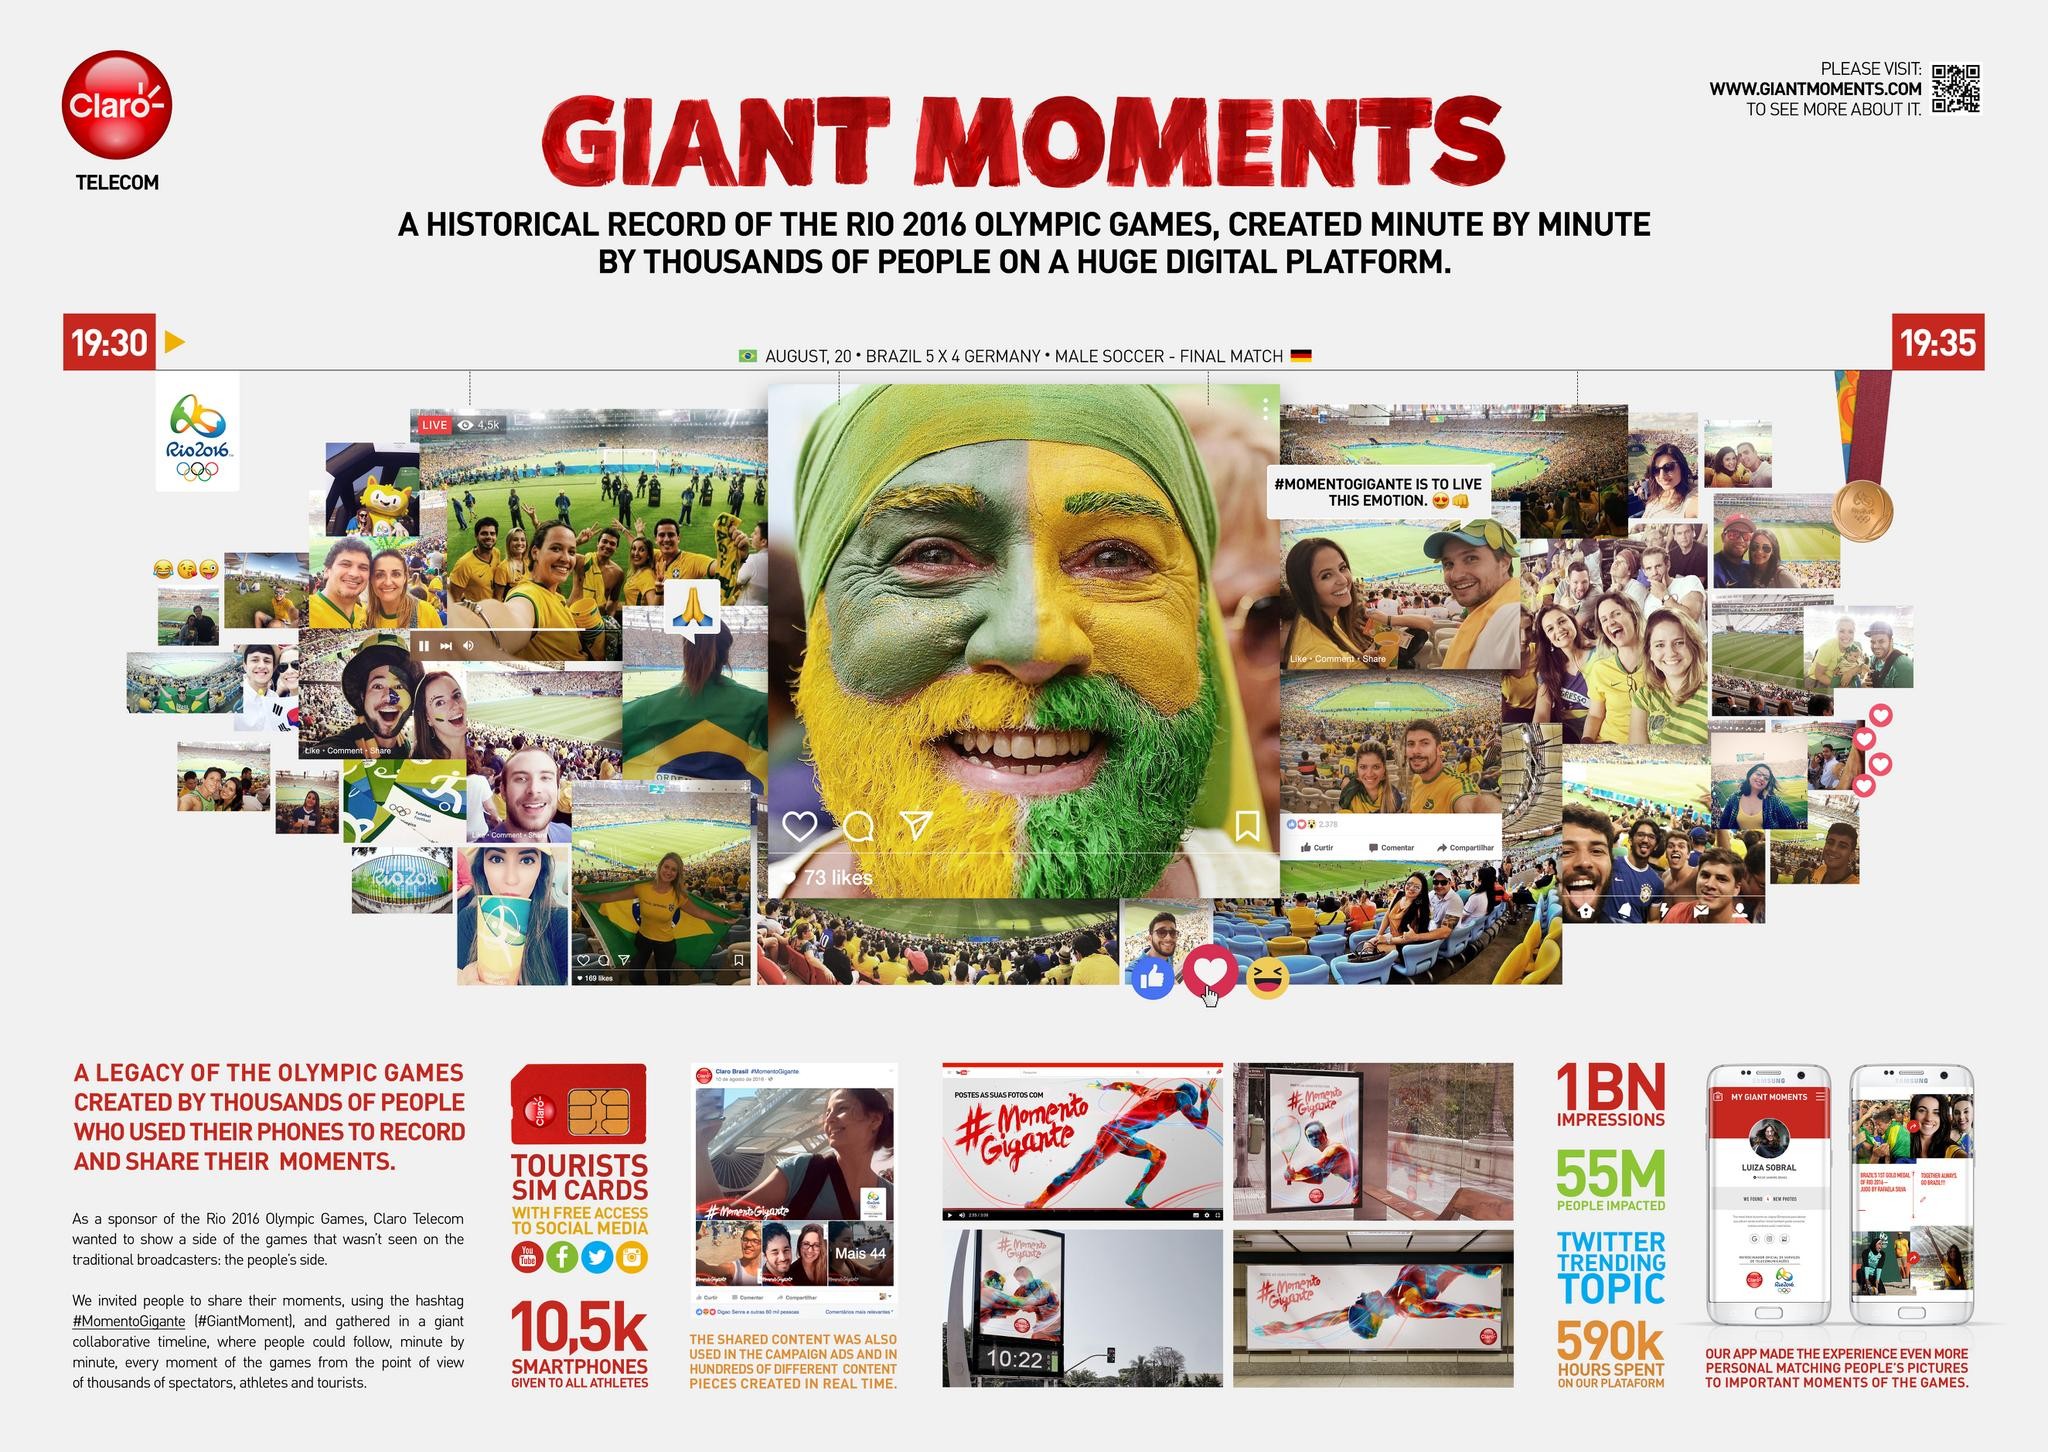 Giant Moments